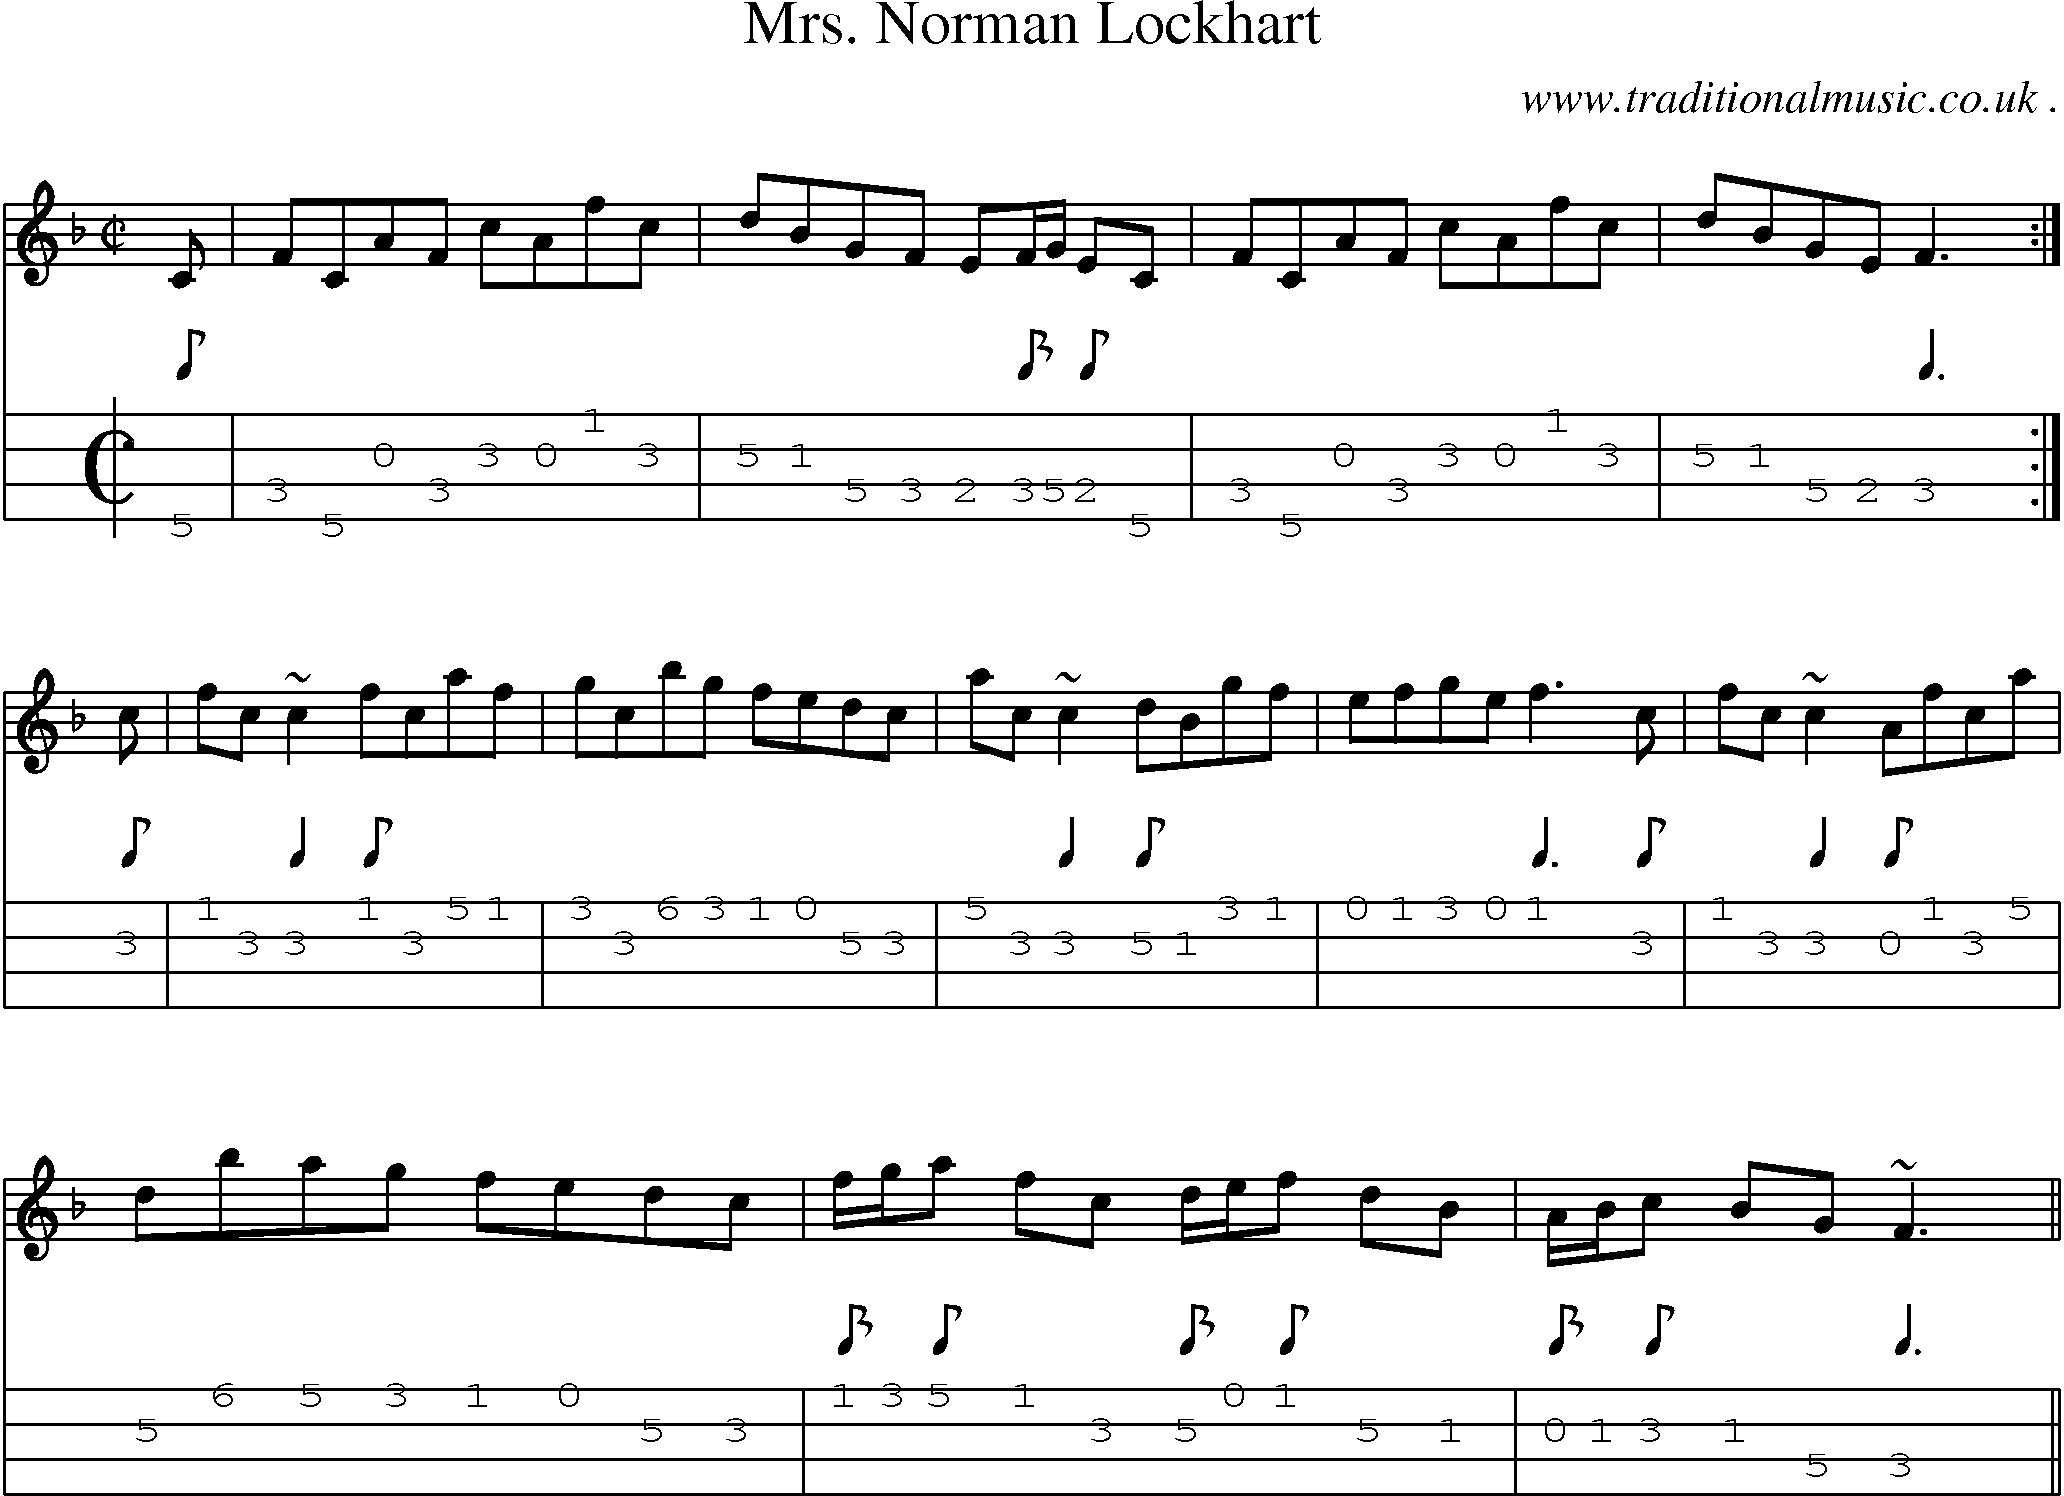 Sheet-music  score, Chords and Mandolin Tabs for Mrs Norman Lockhart